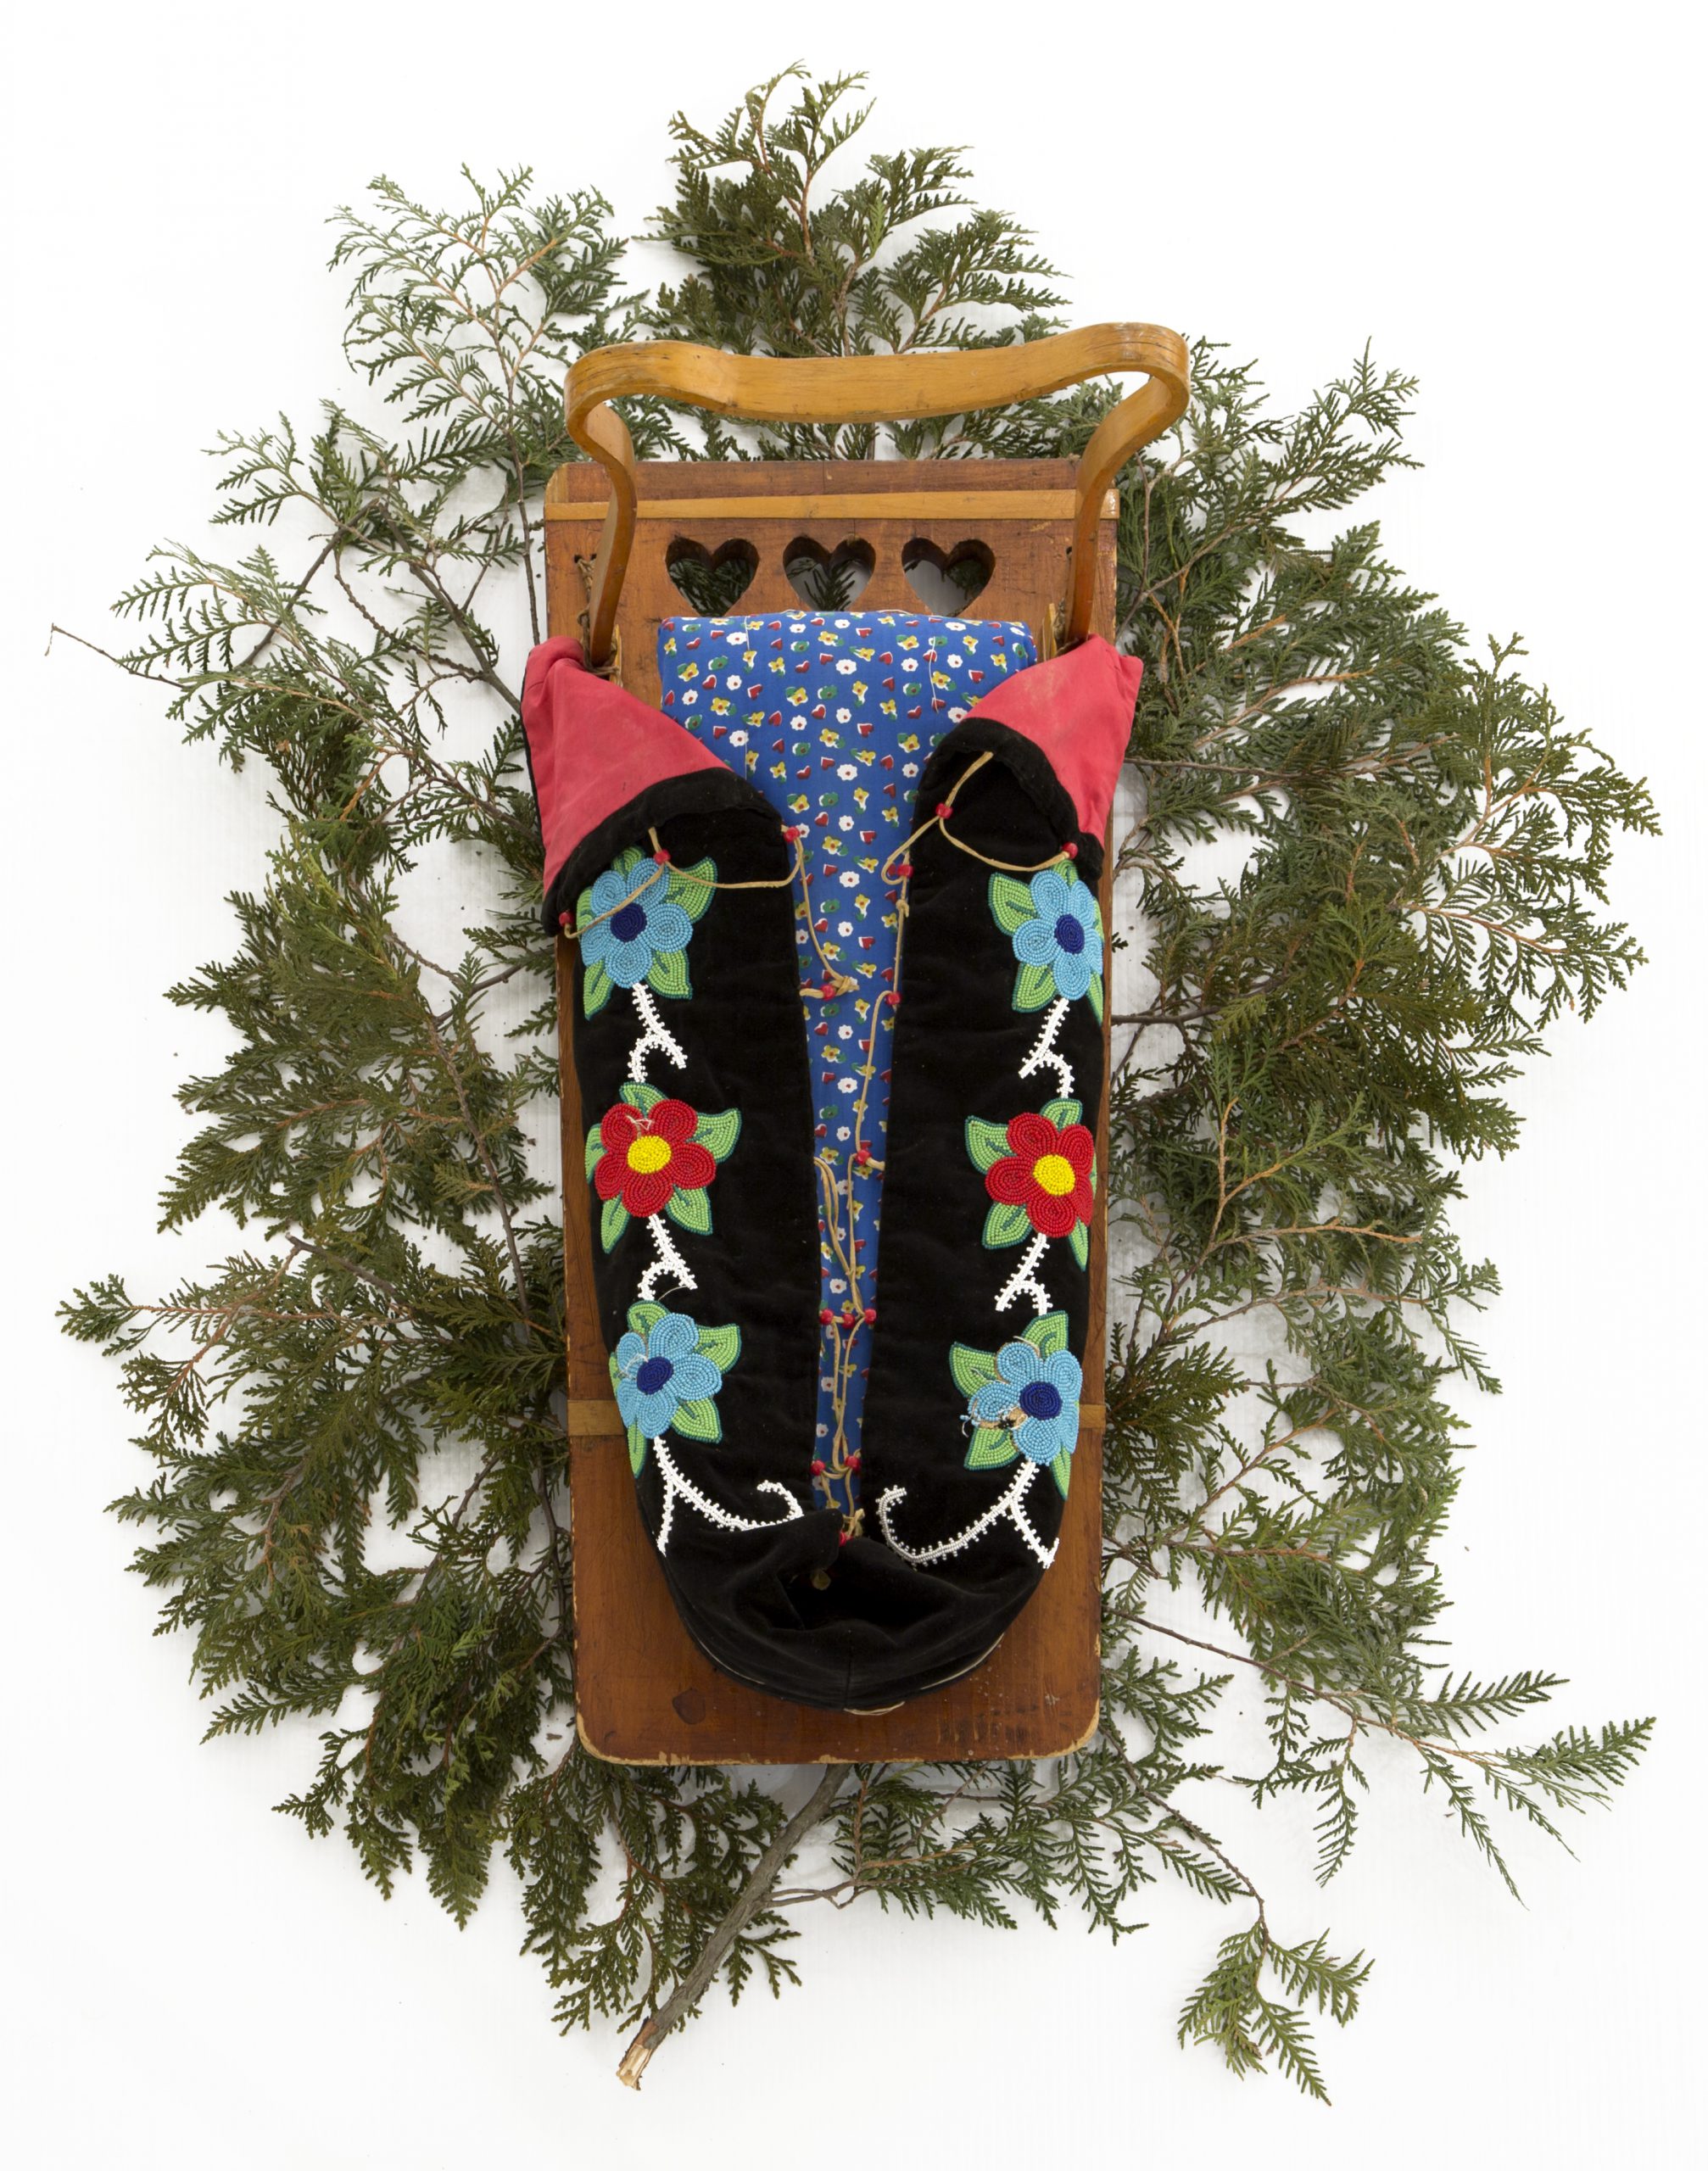 Photo of a tikinagaan (cradleboard) featuring traditional beading, placed on a backdrop of cedar branches.